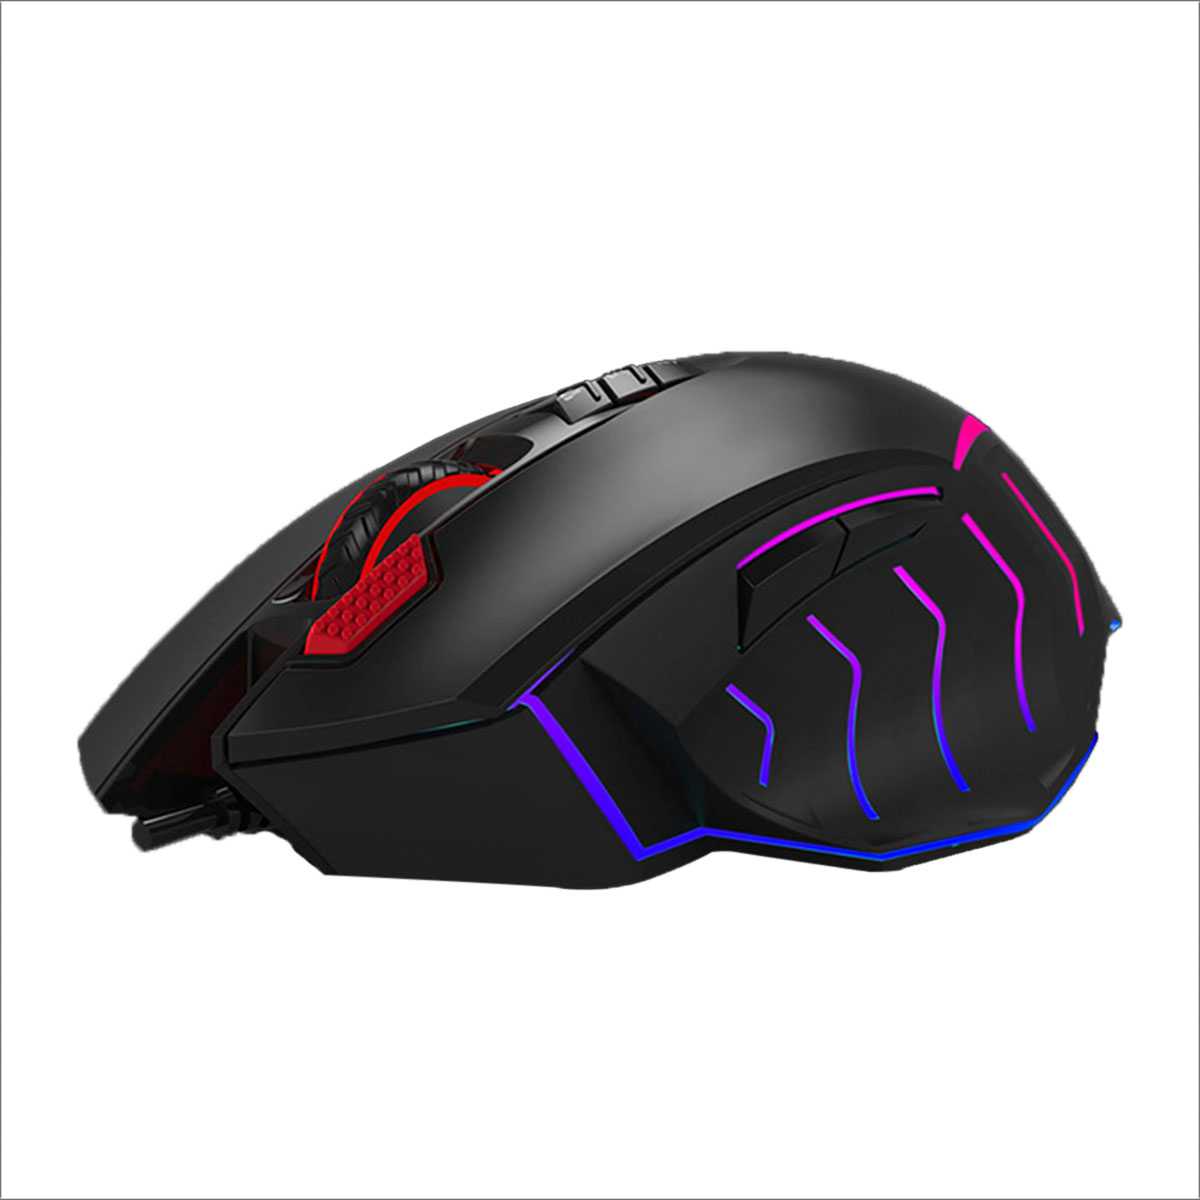 Bloody J95 2-Fire RGB Animation Gaming Mouse - Black